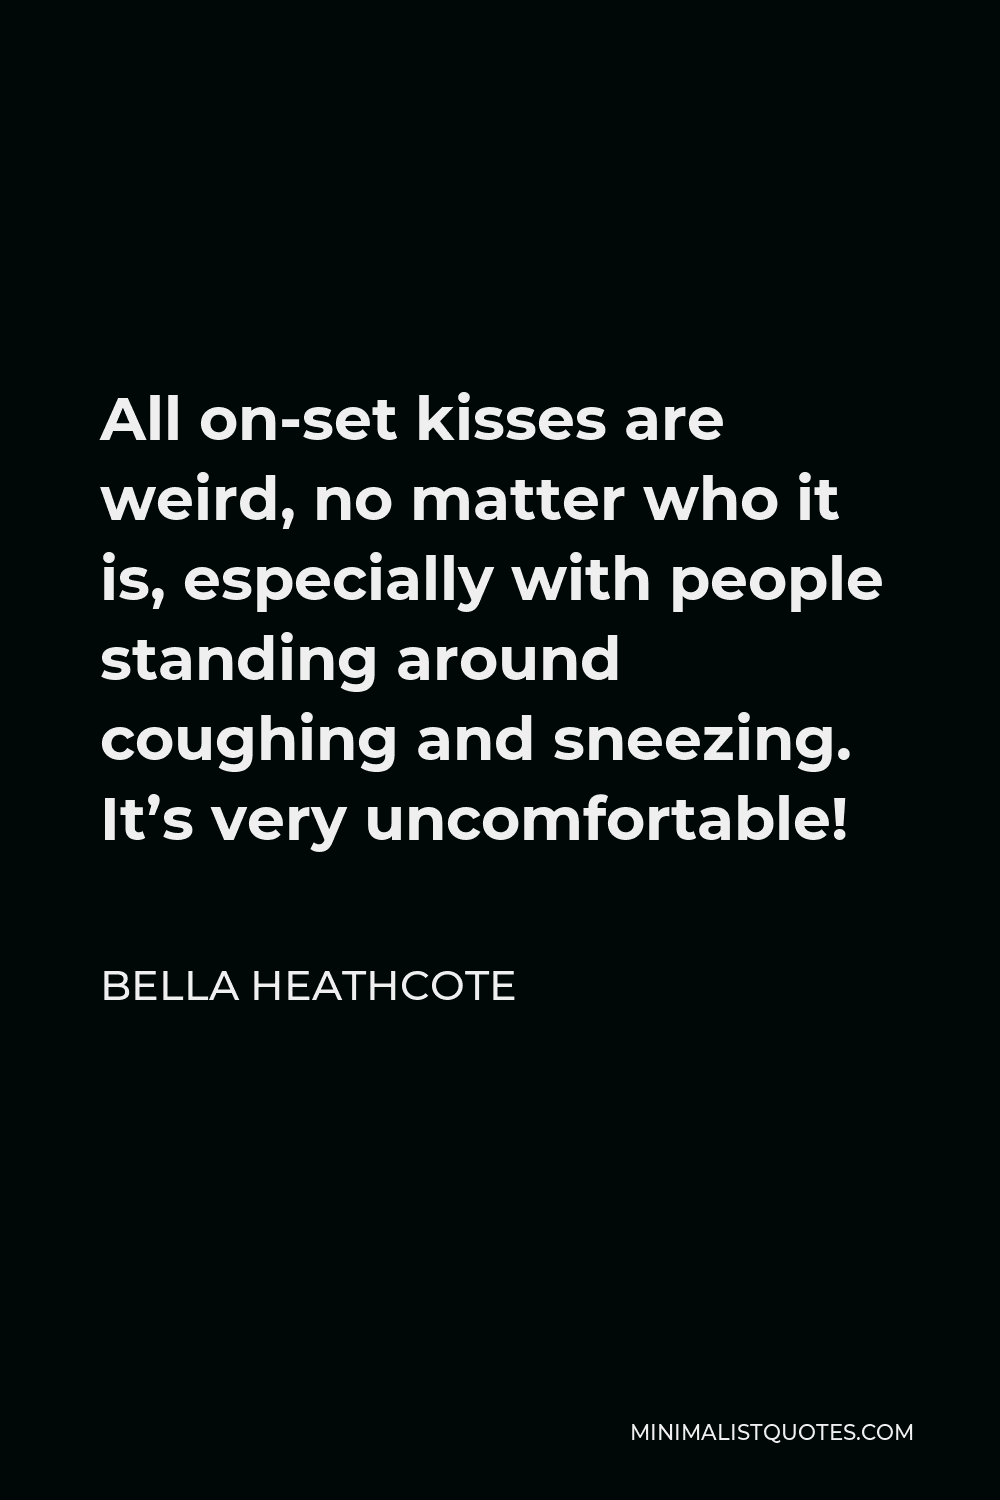 Bella Heathcote Quote - All on-set kisses are weird, no matter who it is, especially with people standing around coughing and sneezing. It’s very uncomfortable!